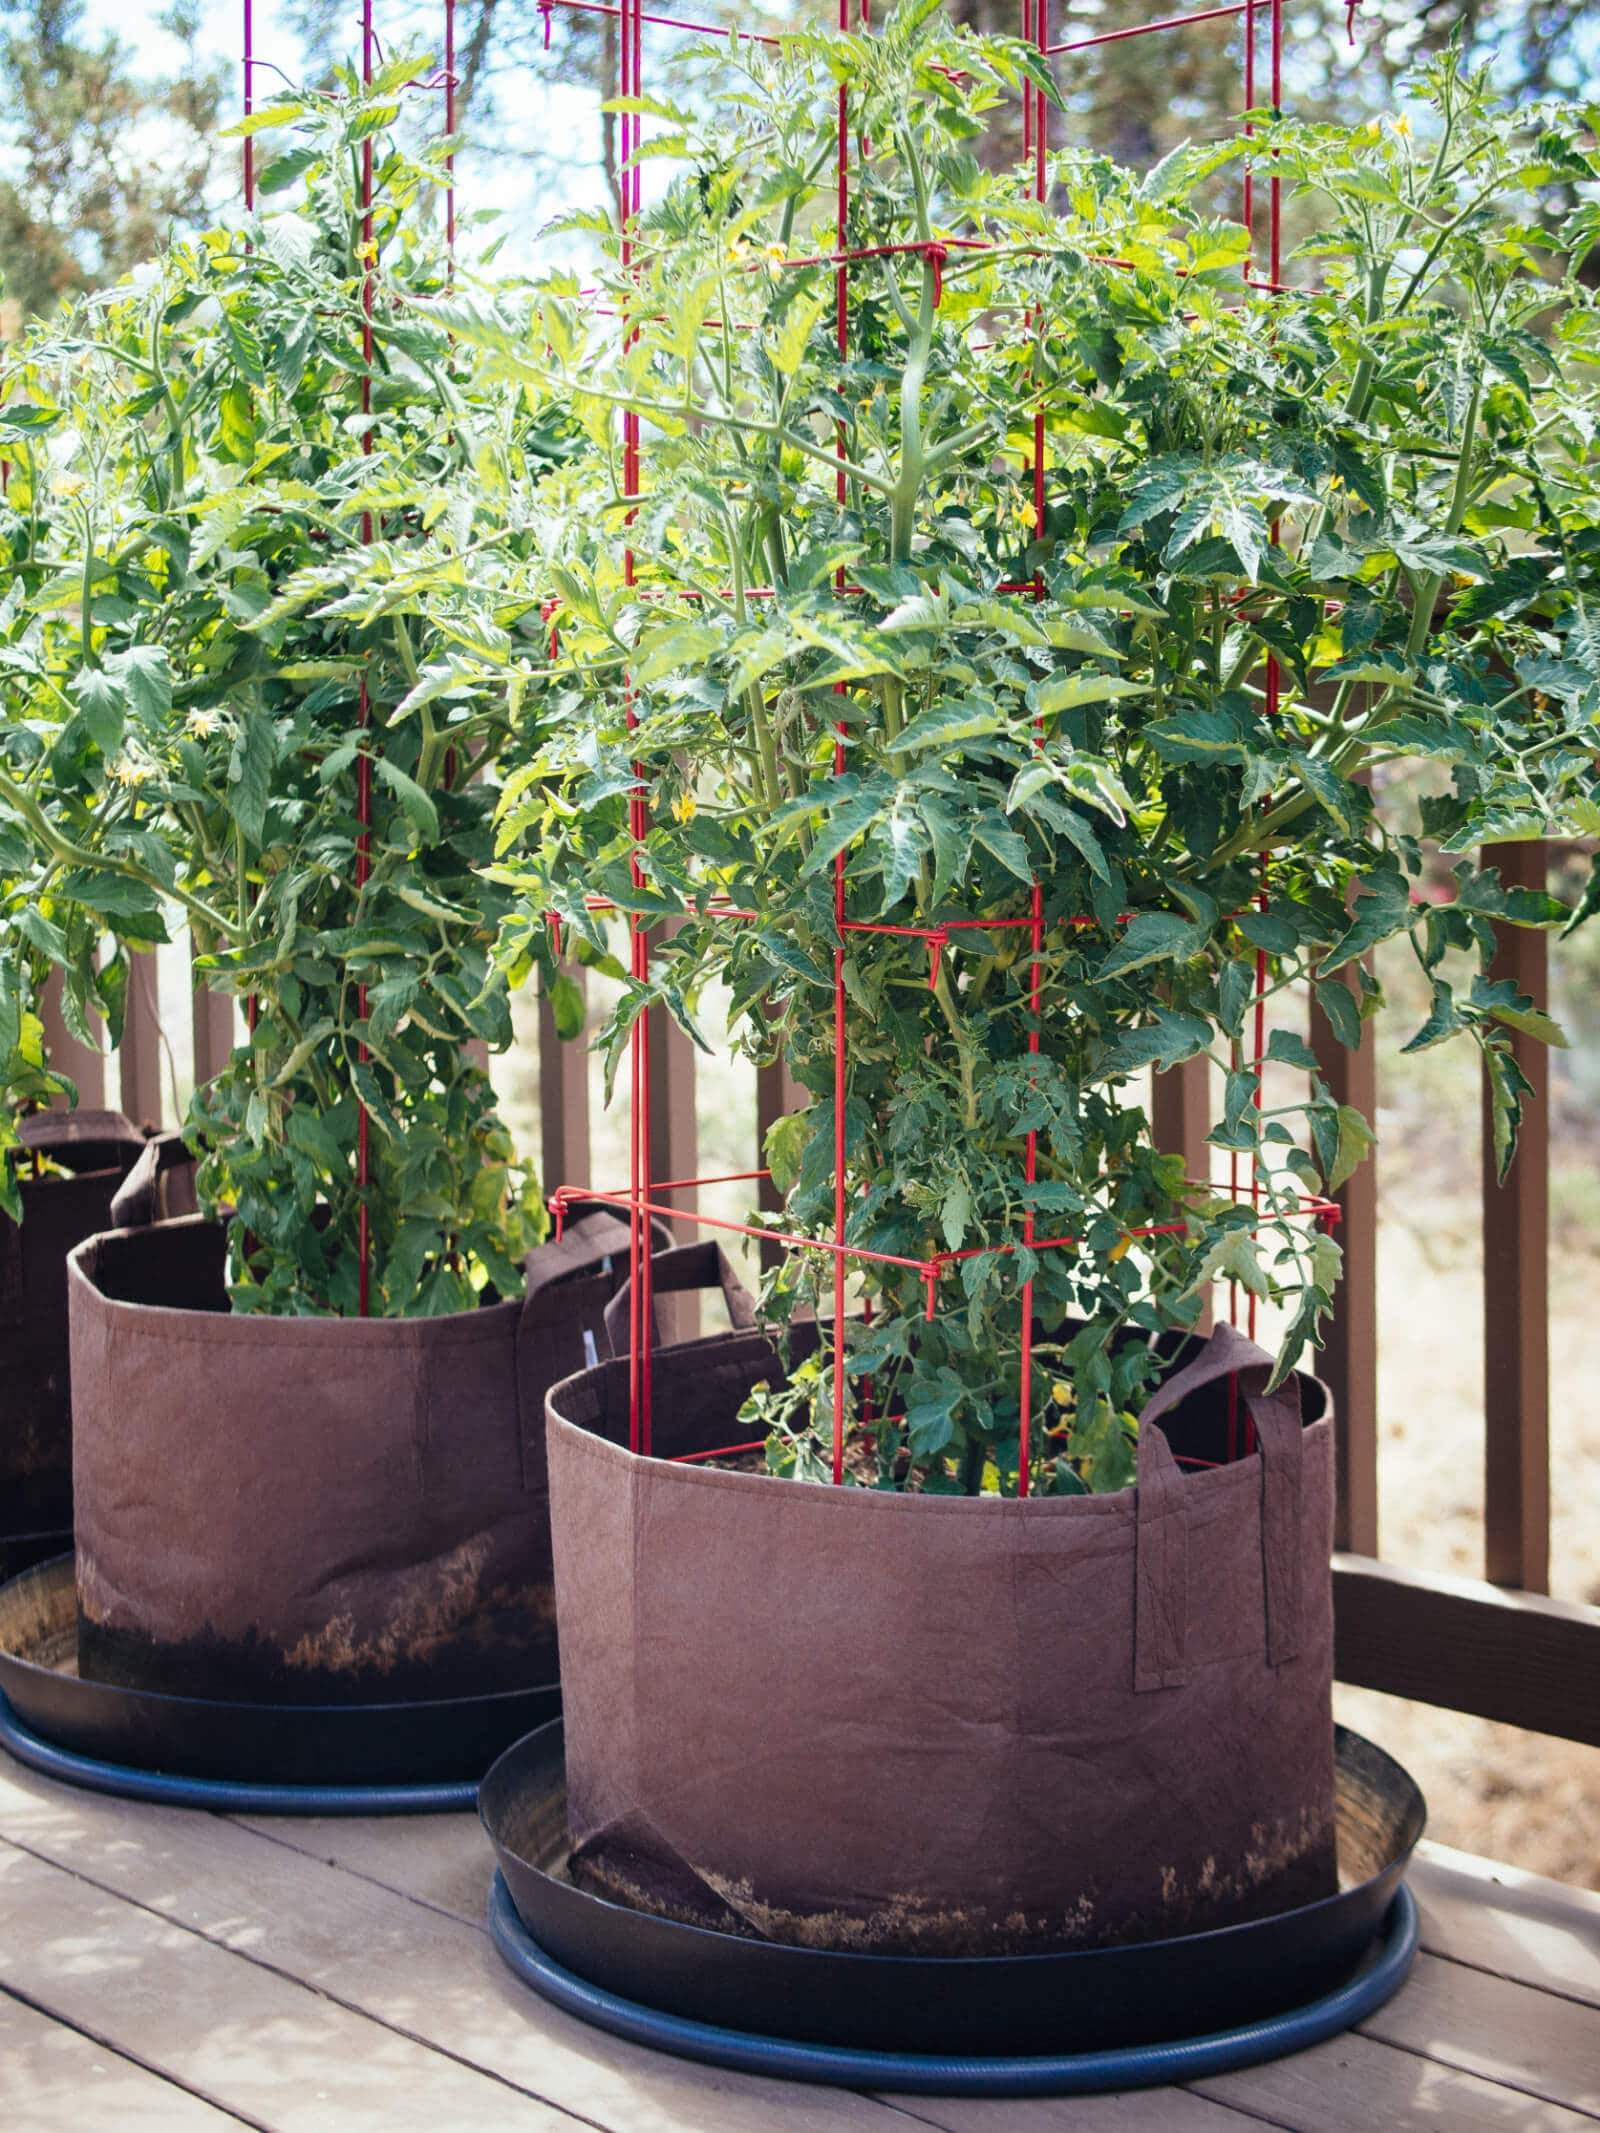 Grow tomato plants in 15-gallon containers or larger